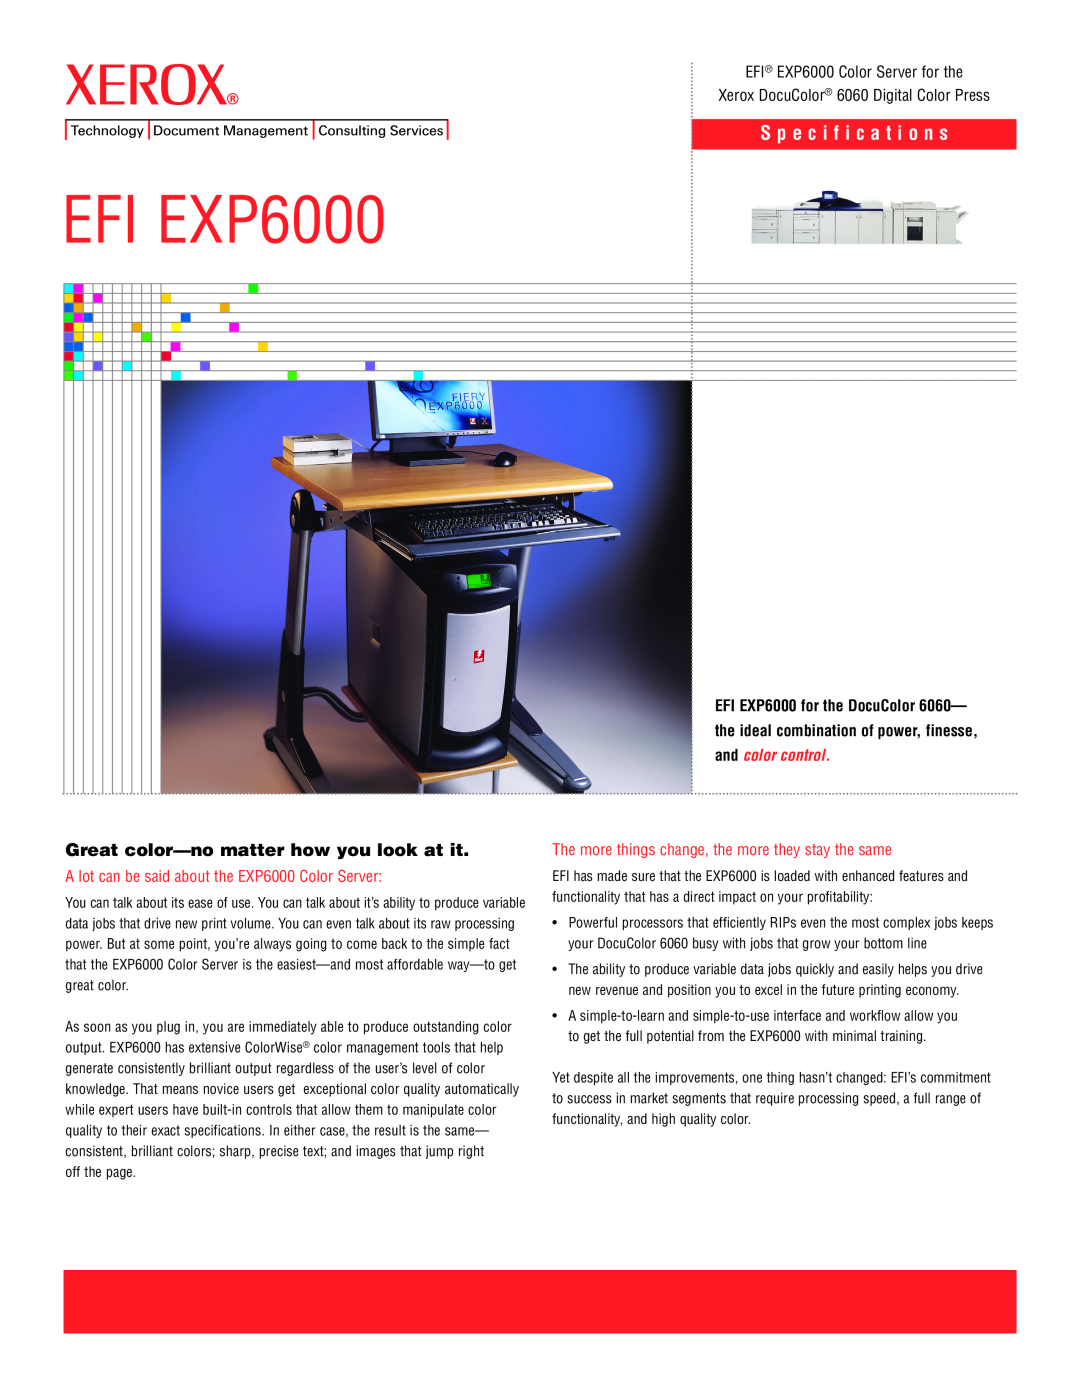 Xerox specifications EFI EXP6000, S p e c i f i c a t i o n s, Great color-nomatter how you look at it 